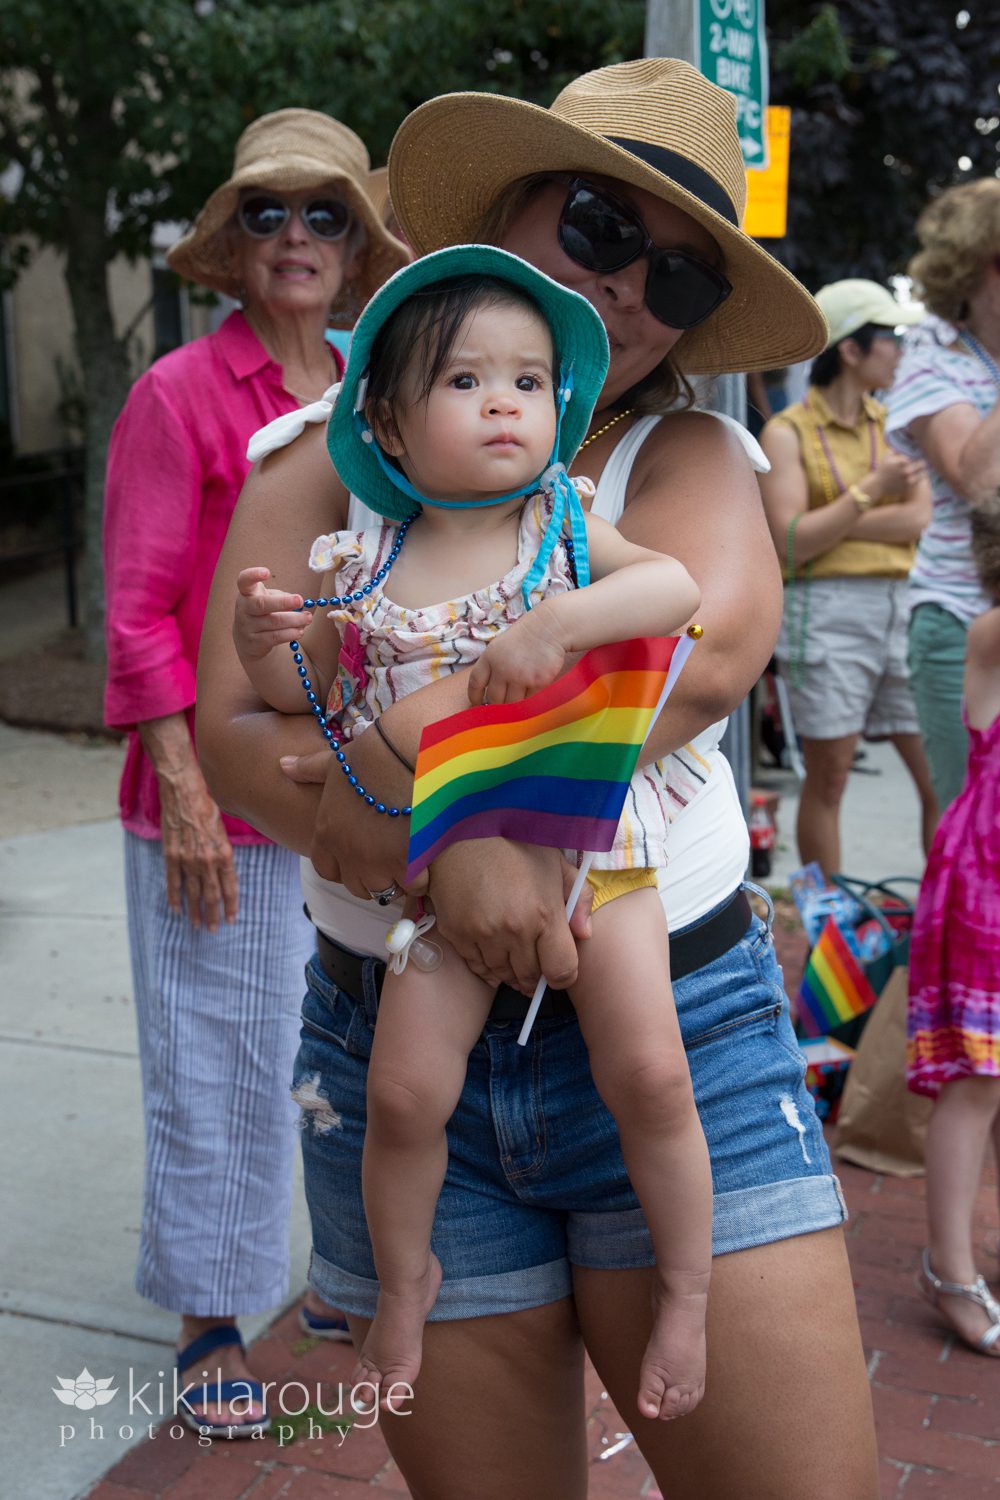 Baby with rainbow flag watching carnival parade